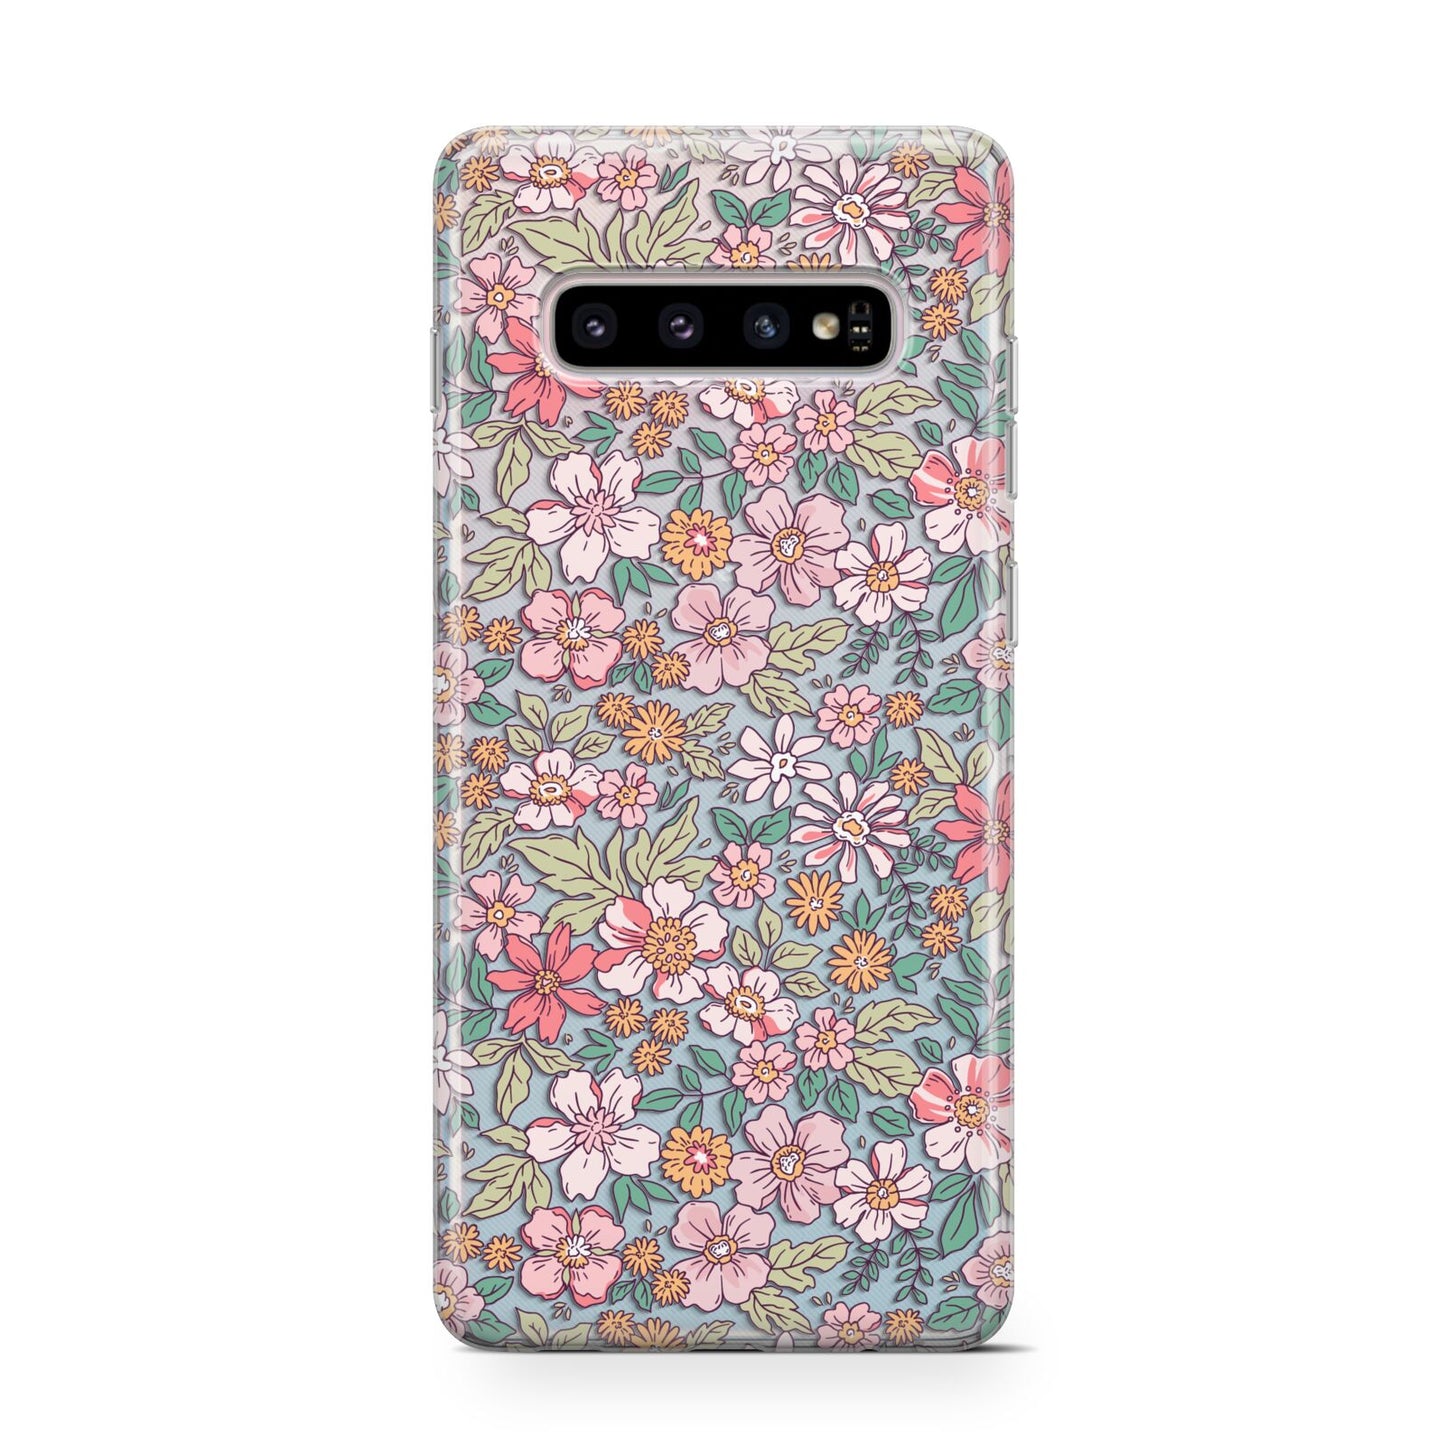 Small Floral Pattern Samsung Galaxy S10 Case